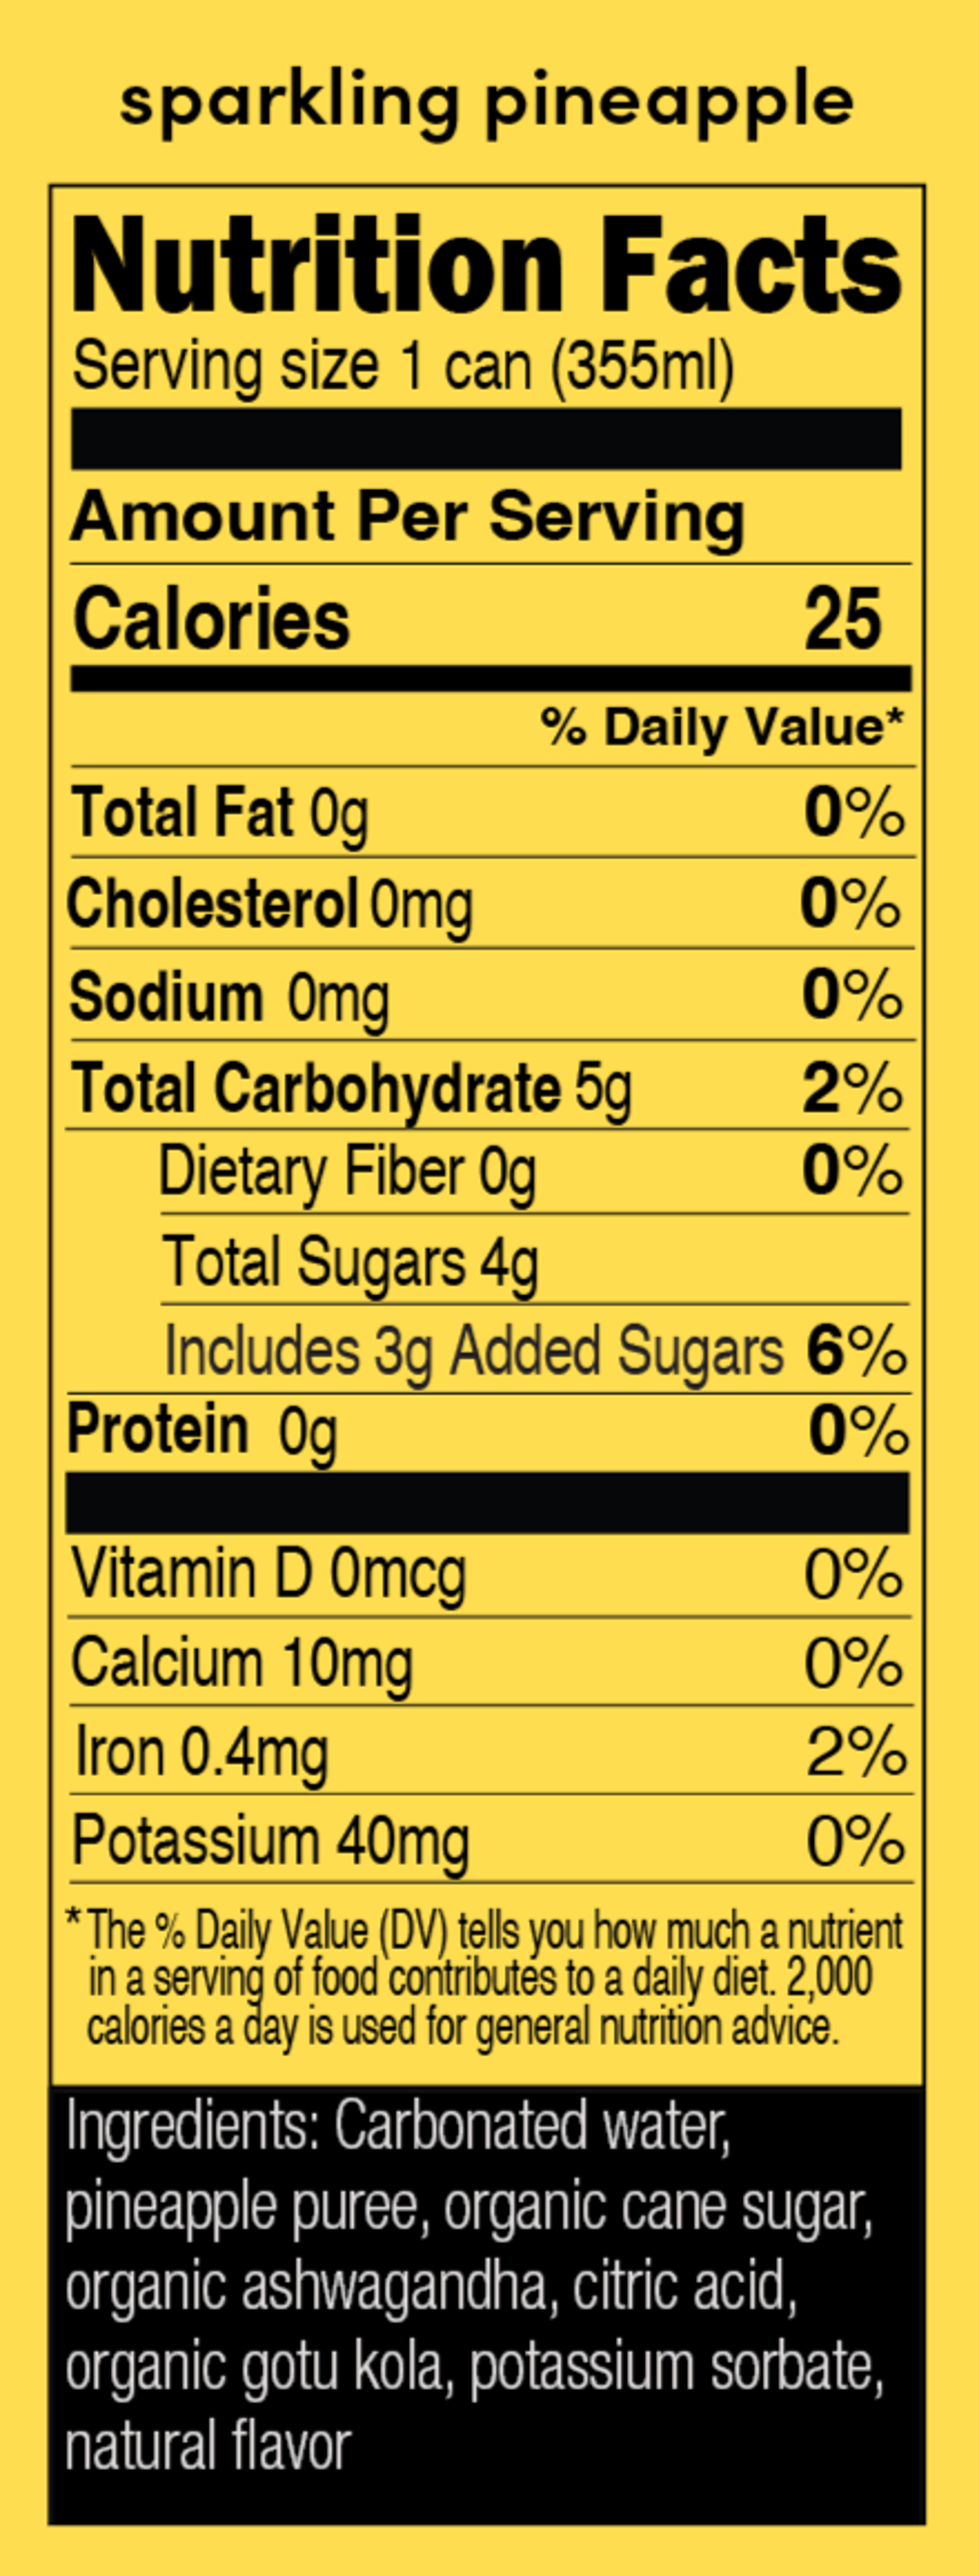 sparkling pineapple nutrition facts